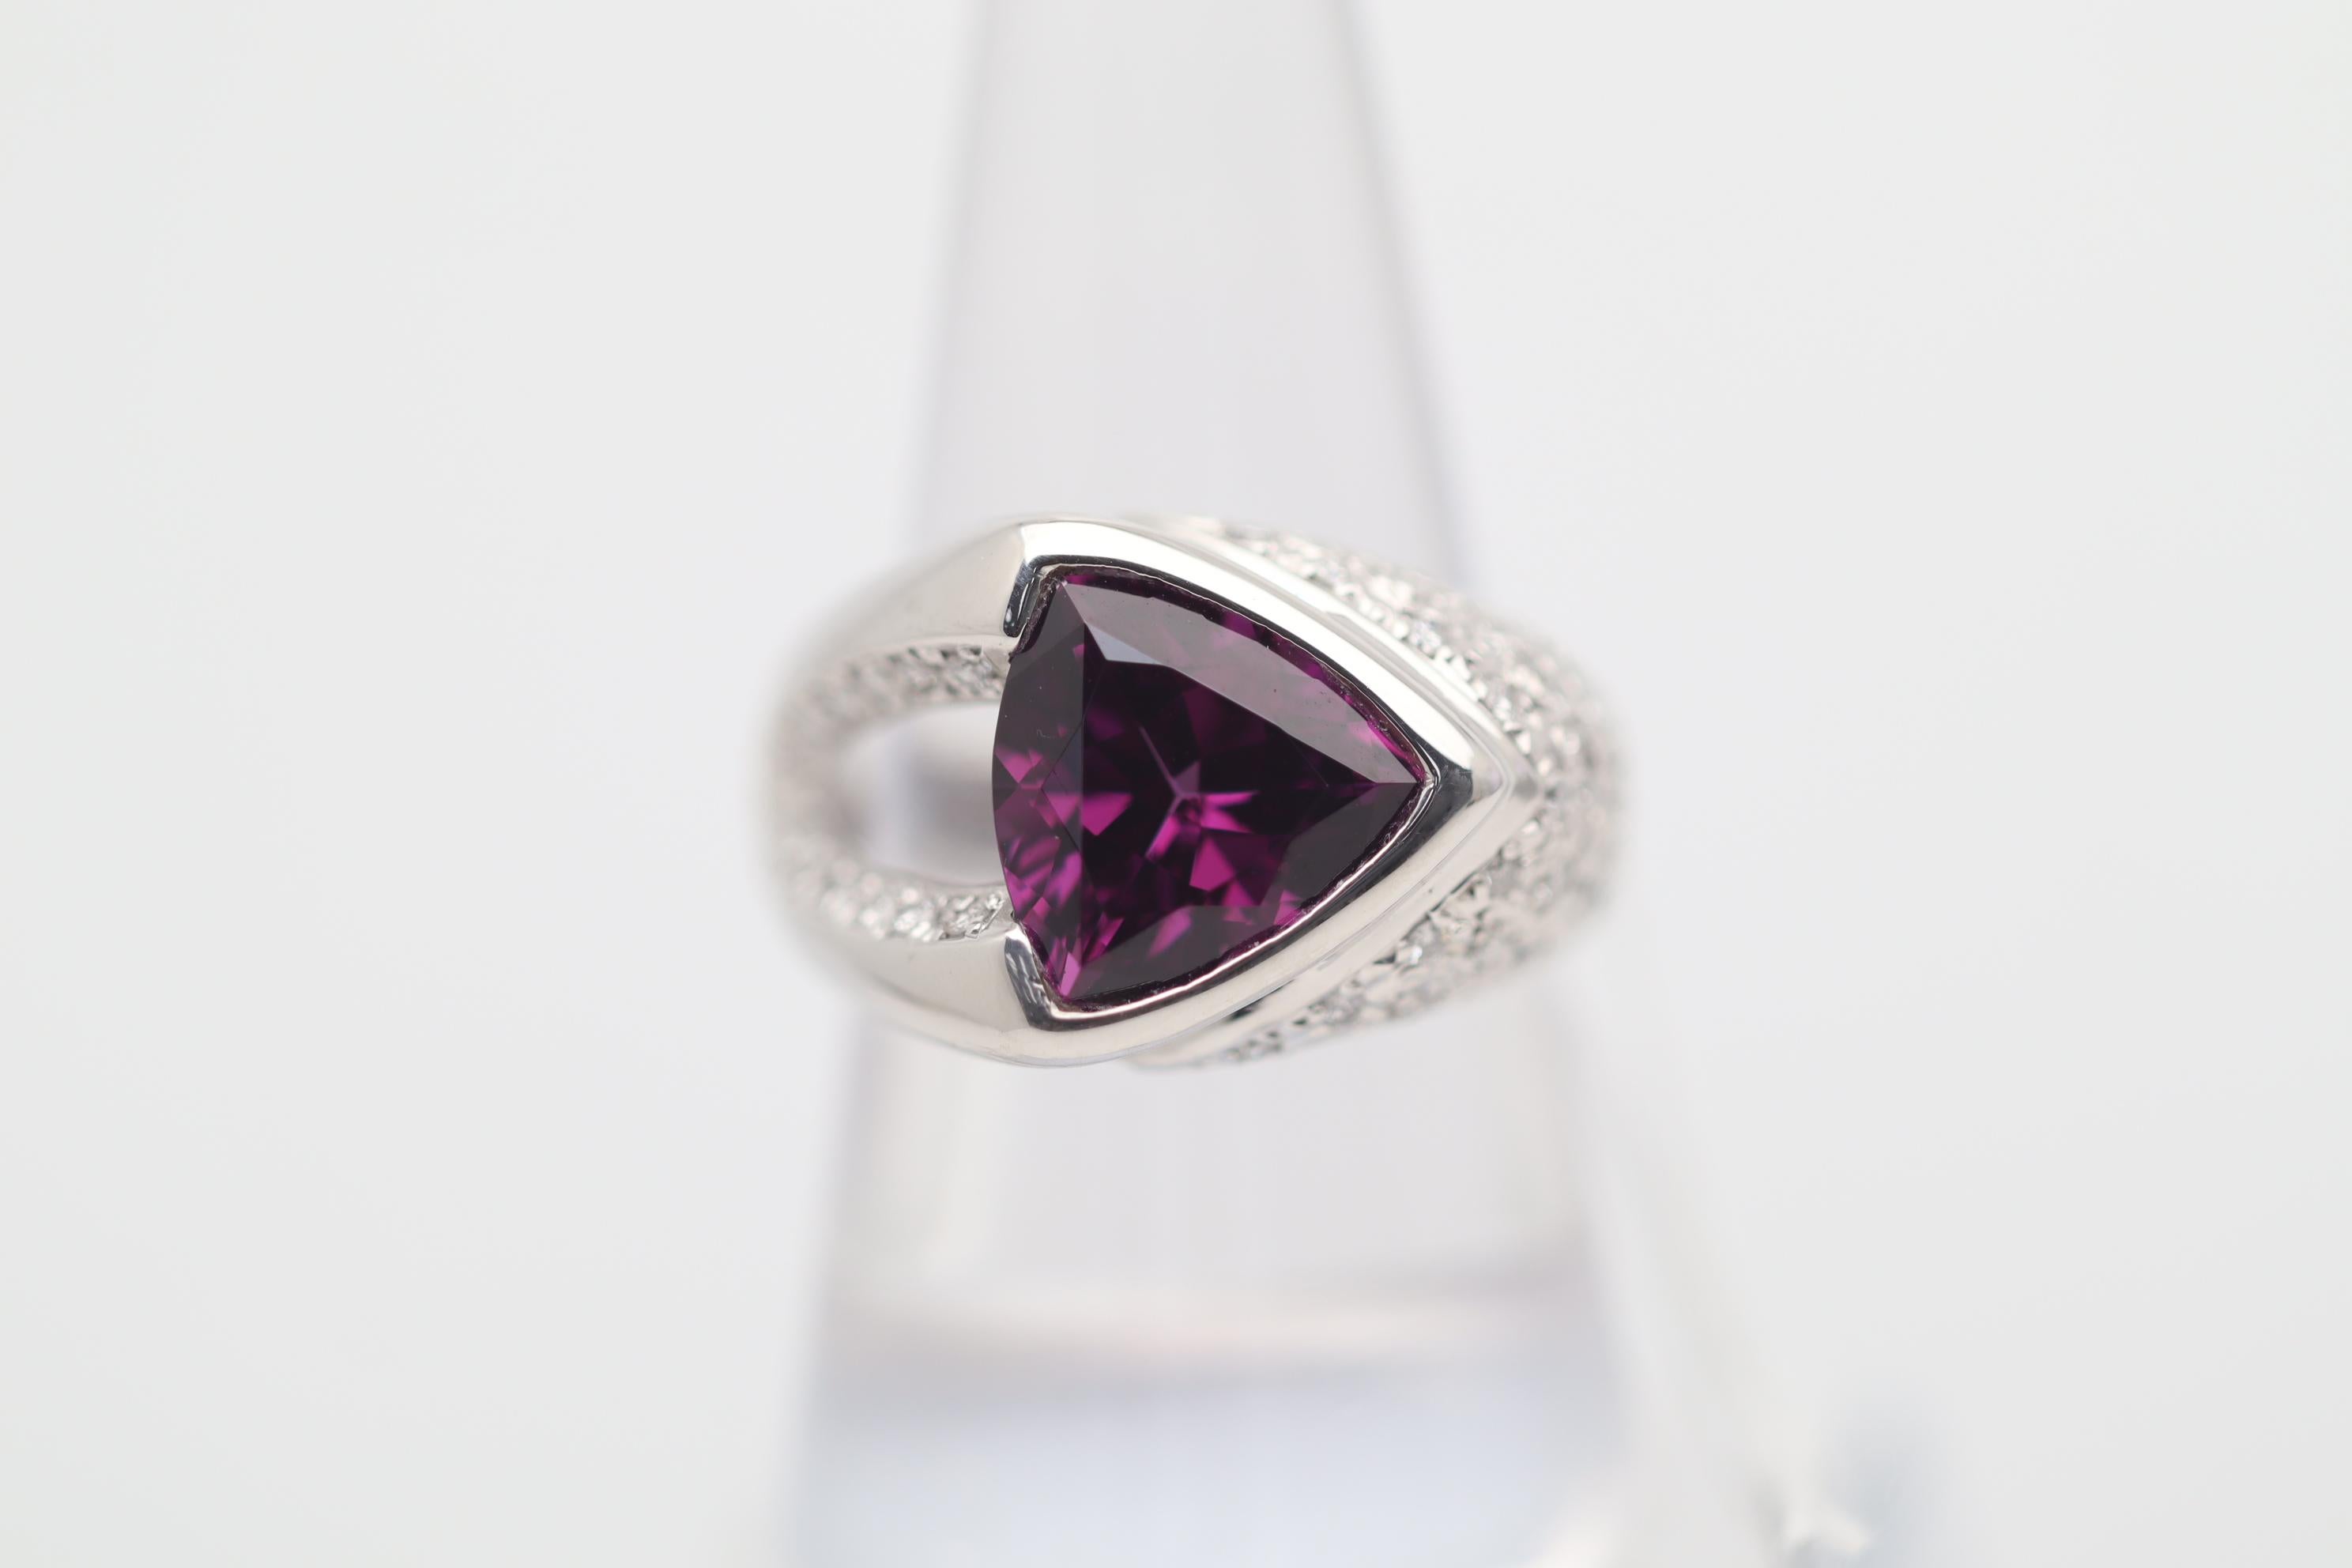 A unique ring featuring a 4.85 carat rhodolite garnet, which has a lovely triangular shape and intense vivid purple-red color. It is complemented by 0.36 carats of round brilliant-cut diamonds set around the ring. Hand-fabricated in platinum and